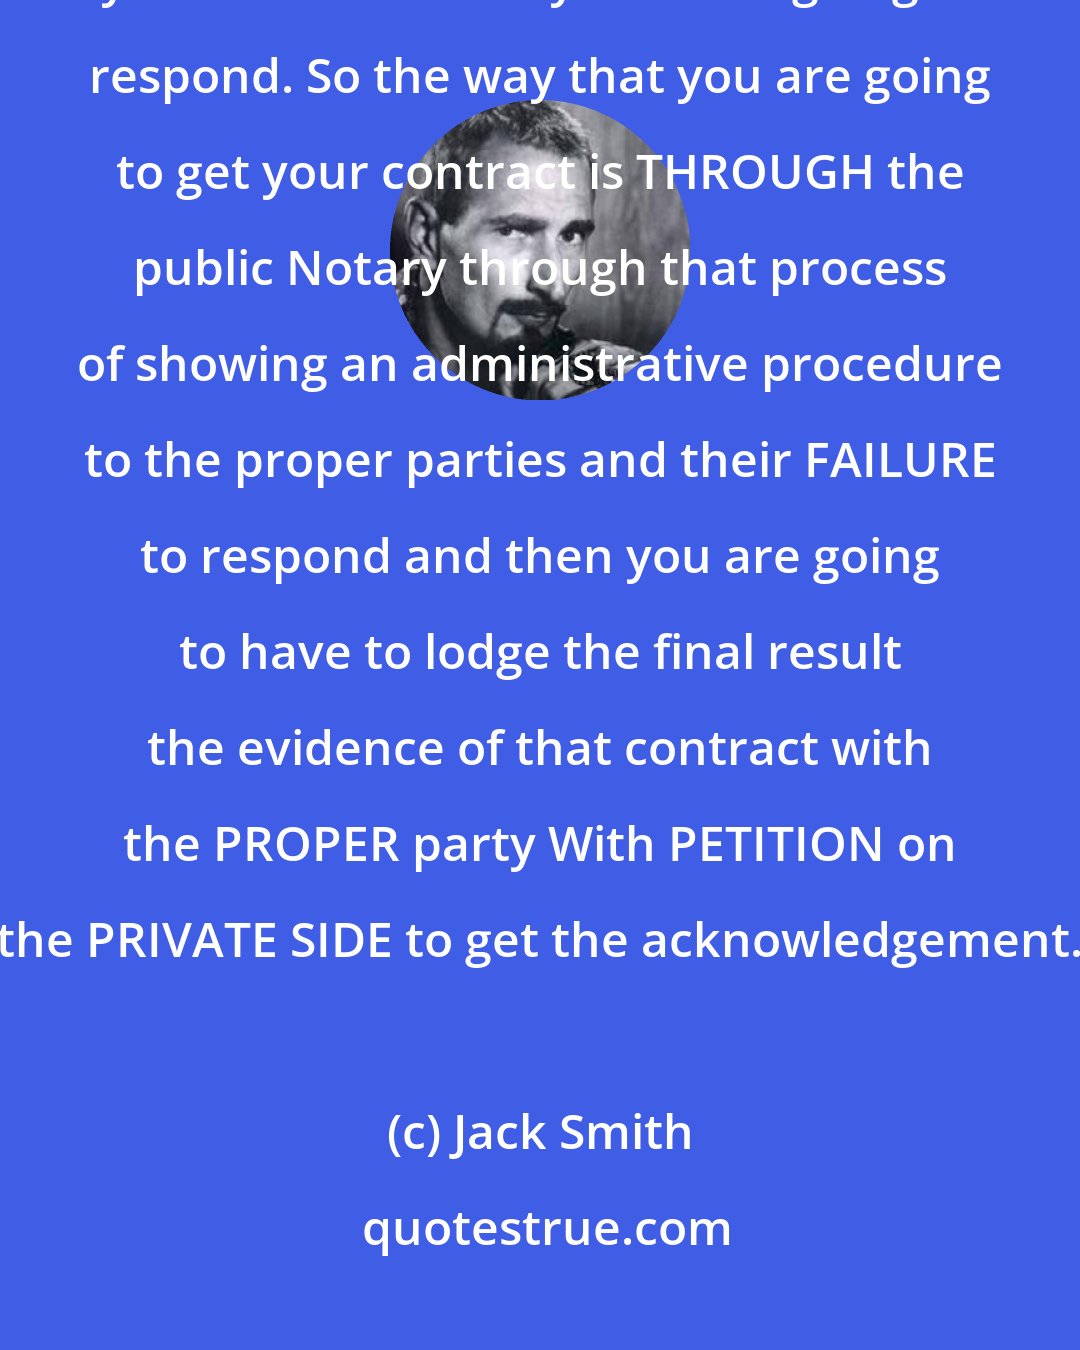 Jack Smith: The CONCEPT is though that you have to get an AGREEMENT BY CONTRACT and you KNOW that they are NOT going to respond. So the way that you are going to get your contract is THROUGH the public Notary through that process of showing an administrative procedure to the proper parties and their FAILURE to respond and then you are going to have to lodge the final result the evidence of that contract with the PROPER party With PETITION on the PRIVATE SIDE to get the acknowledgement.